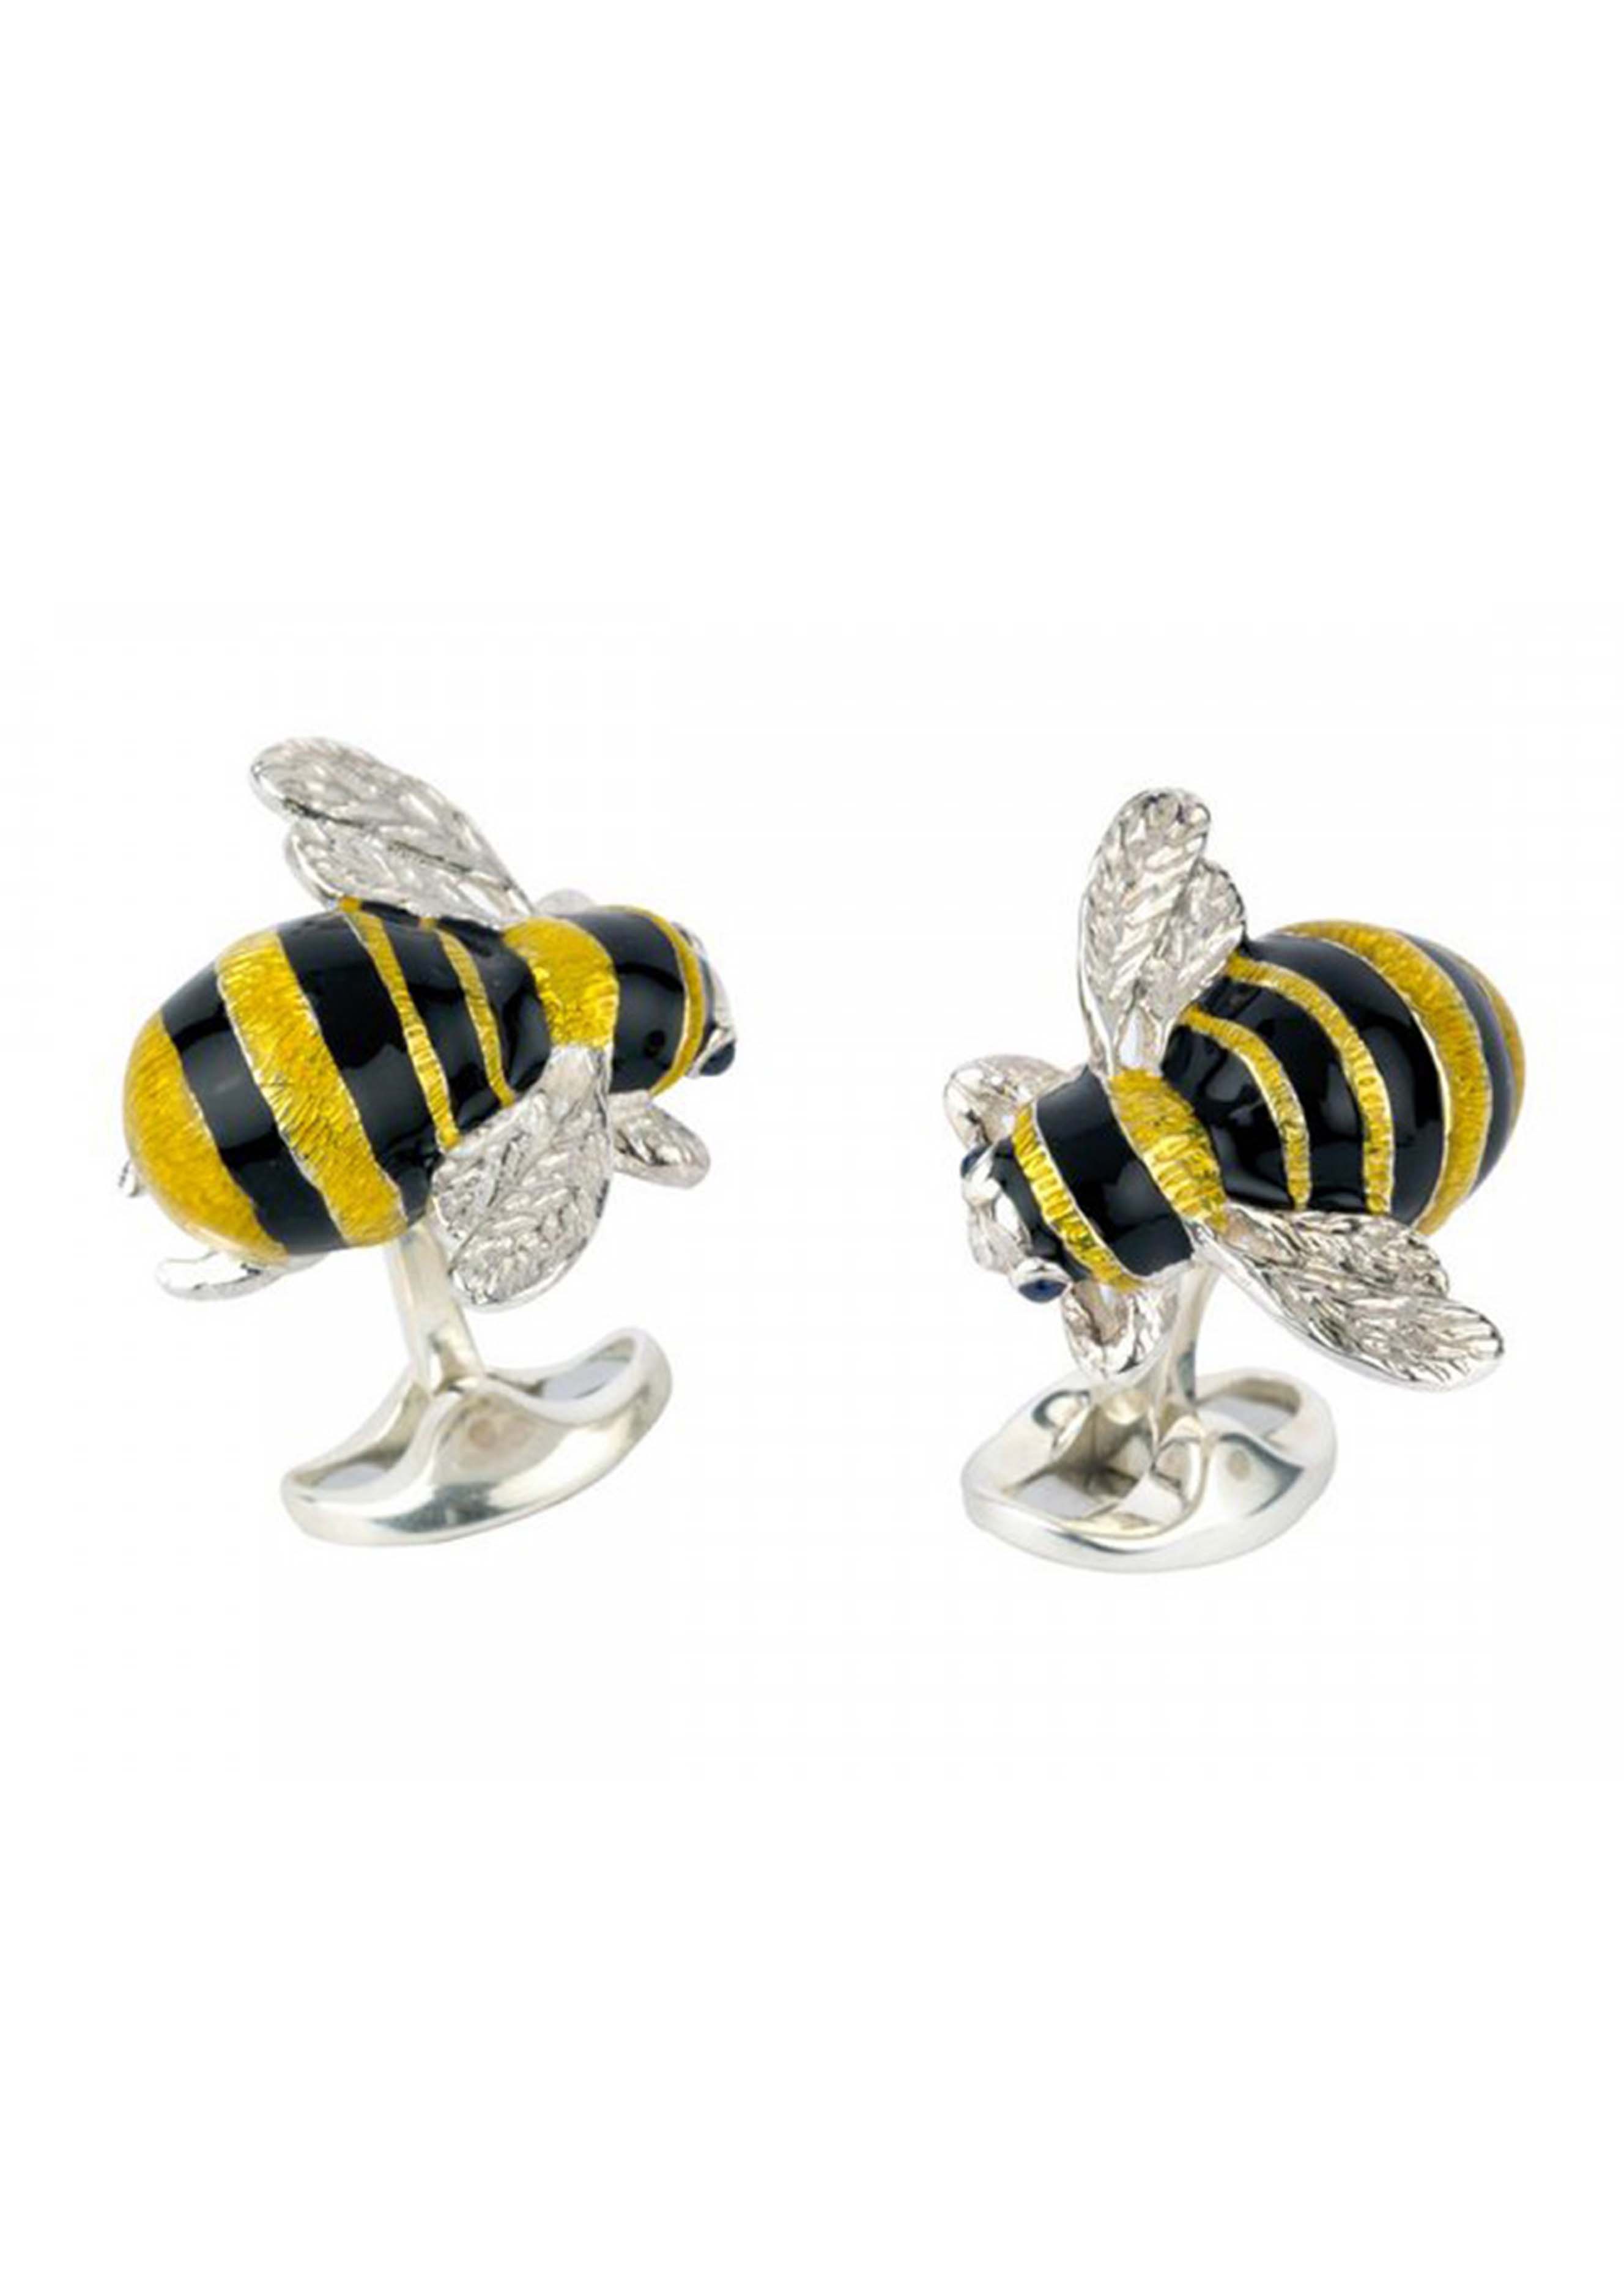 Sterling Silver Bumble Bee Cufflinks Image